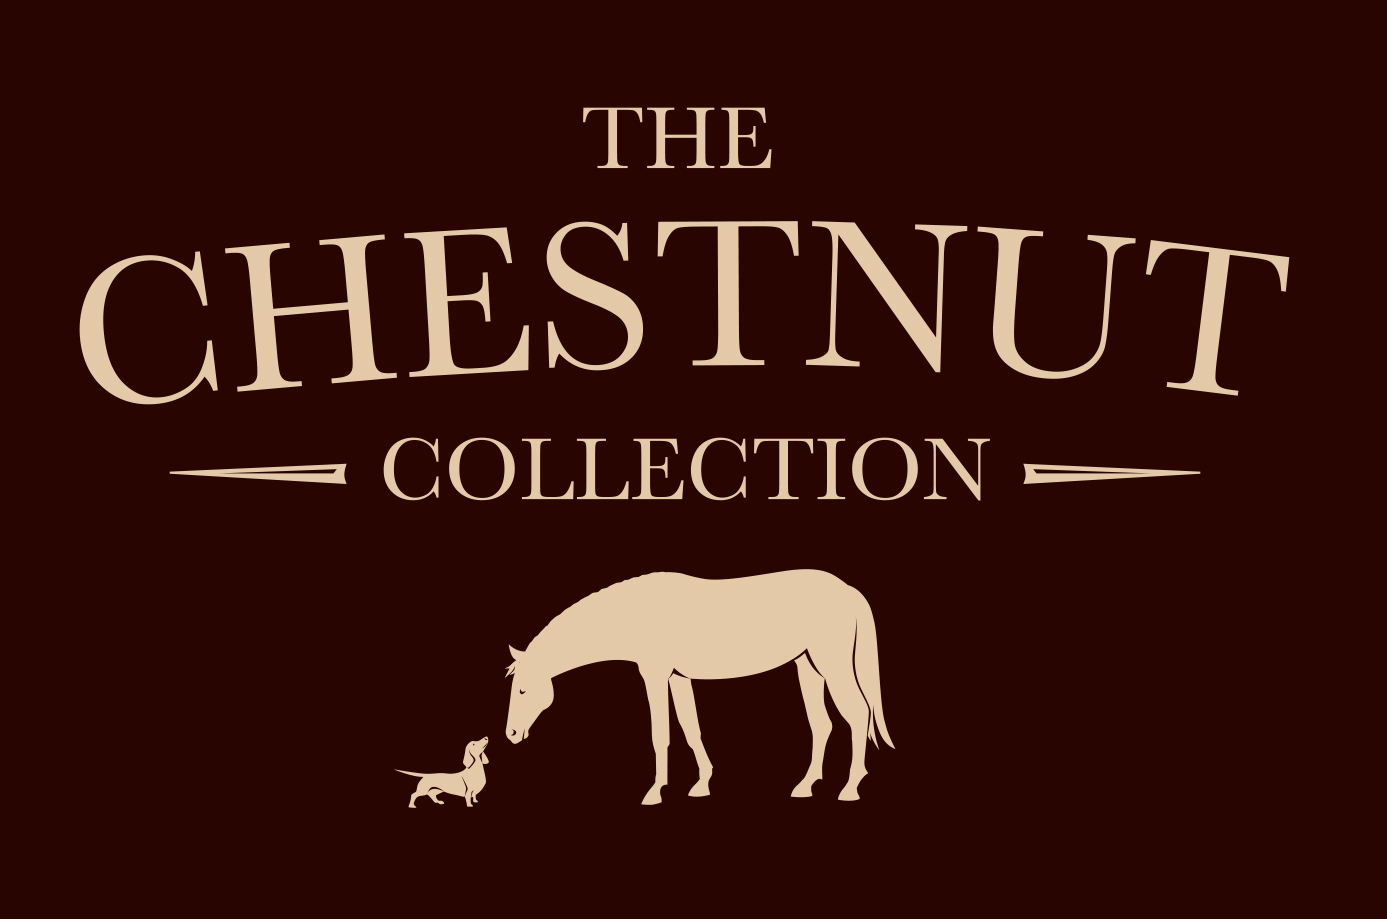 Visit our sister company, The Chestnut Collection